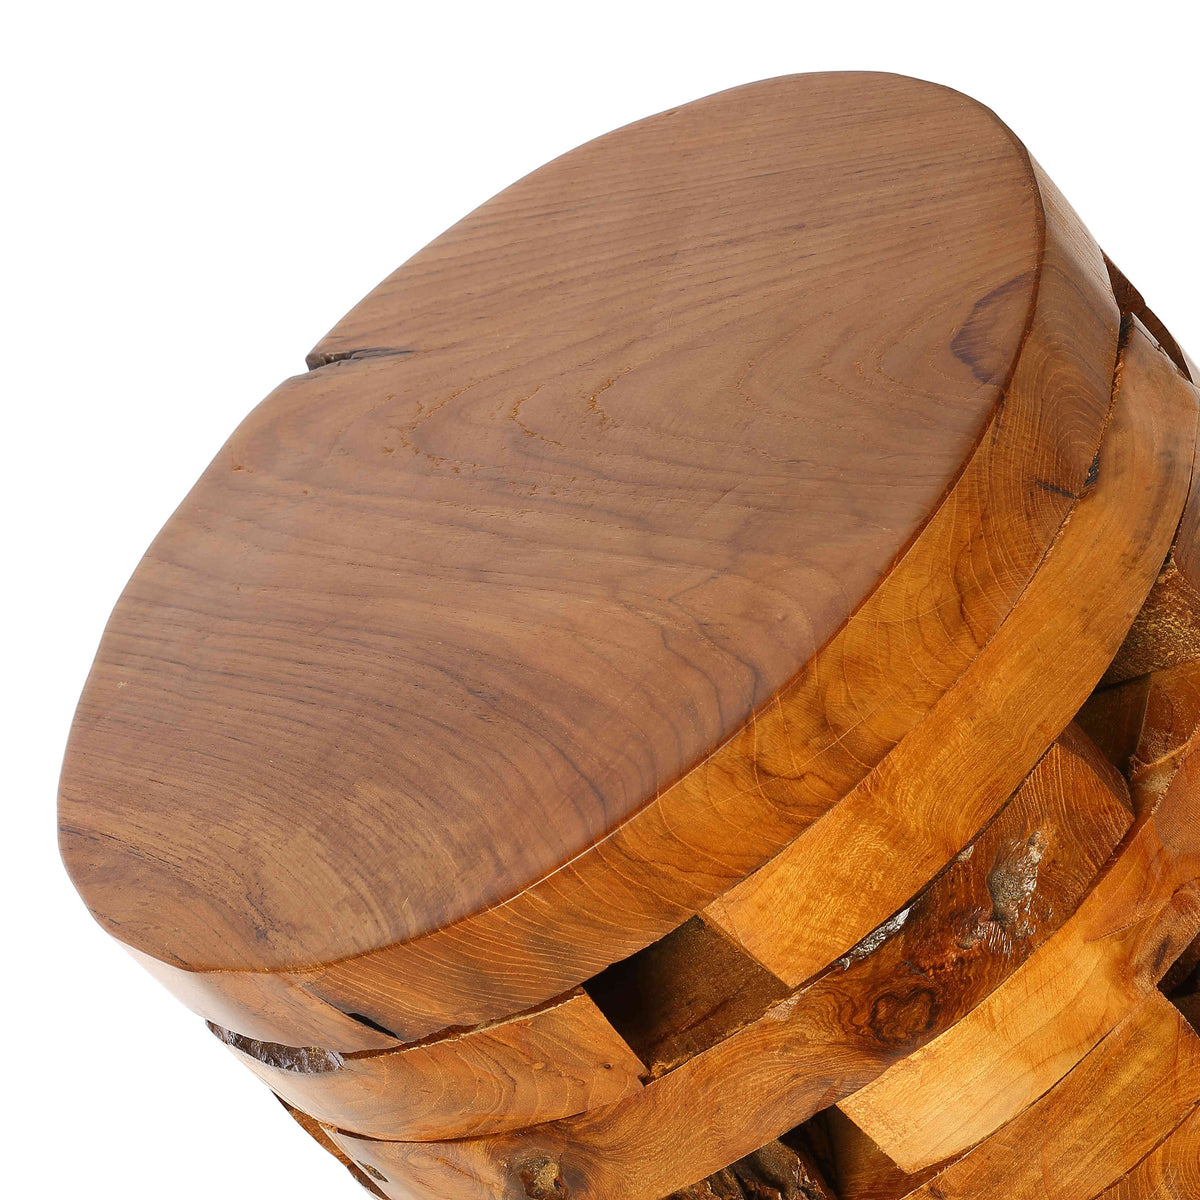 Bare Decor Stonehenge Artisan Accent Stool, Table in Solid Teak Wood